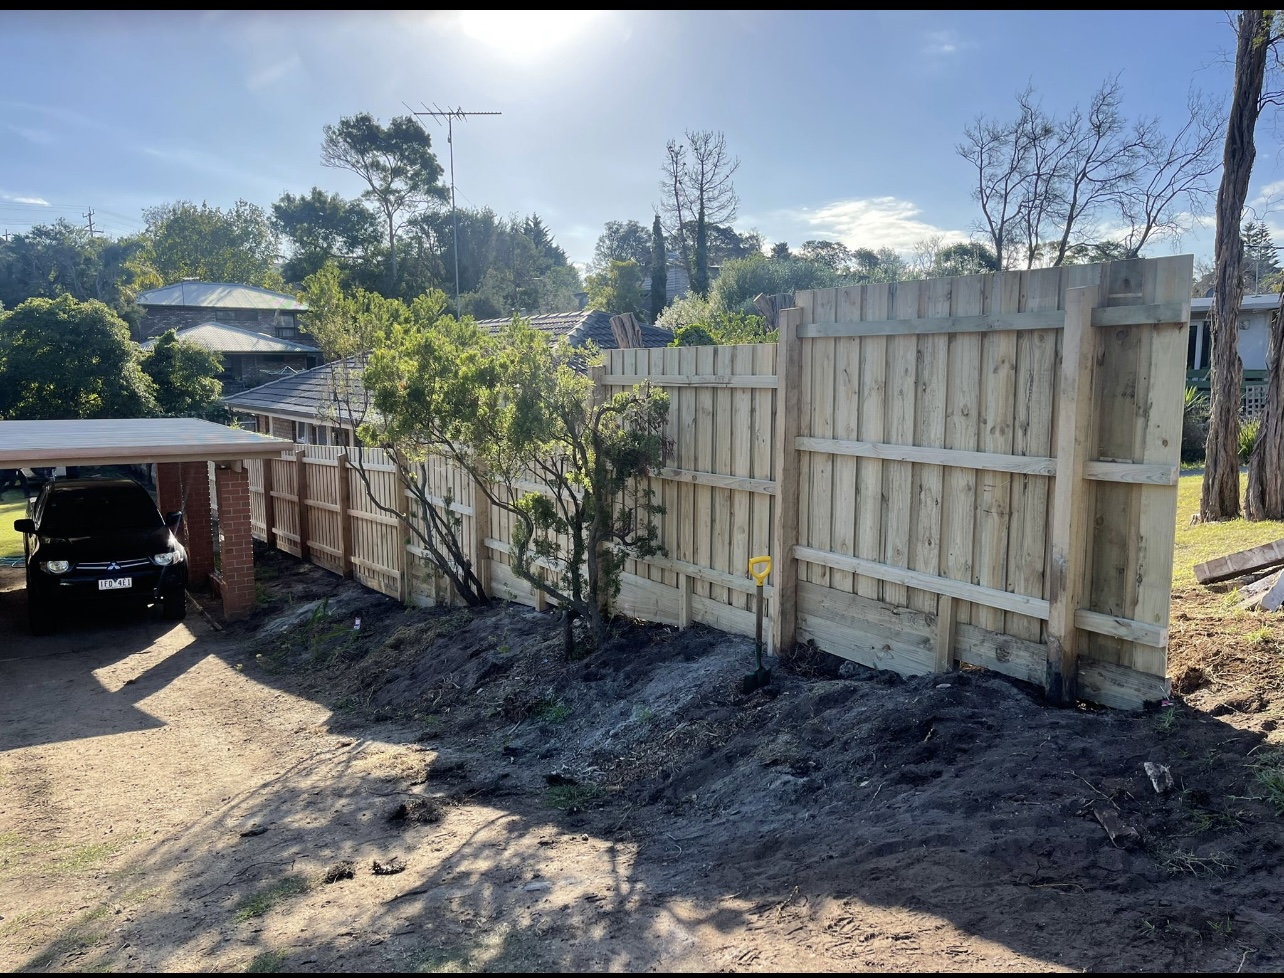 Save Garden area by Paling fence